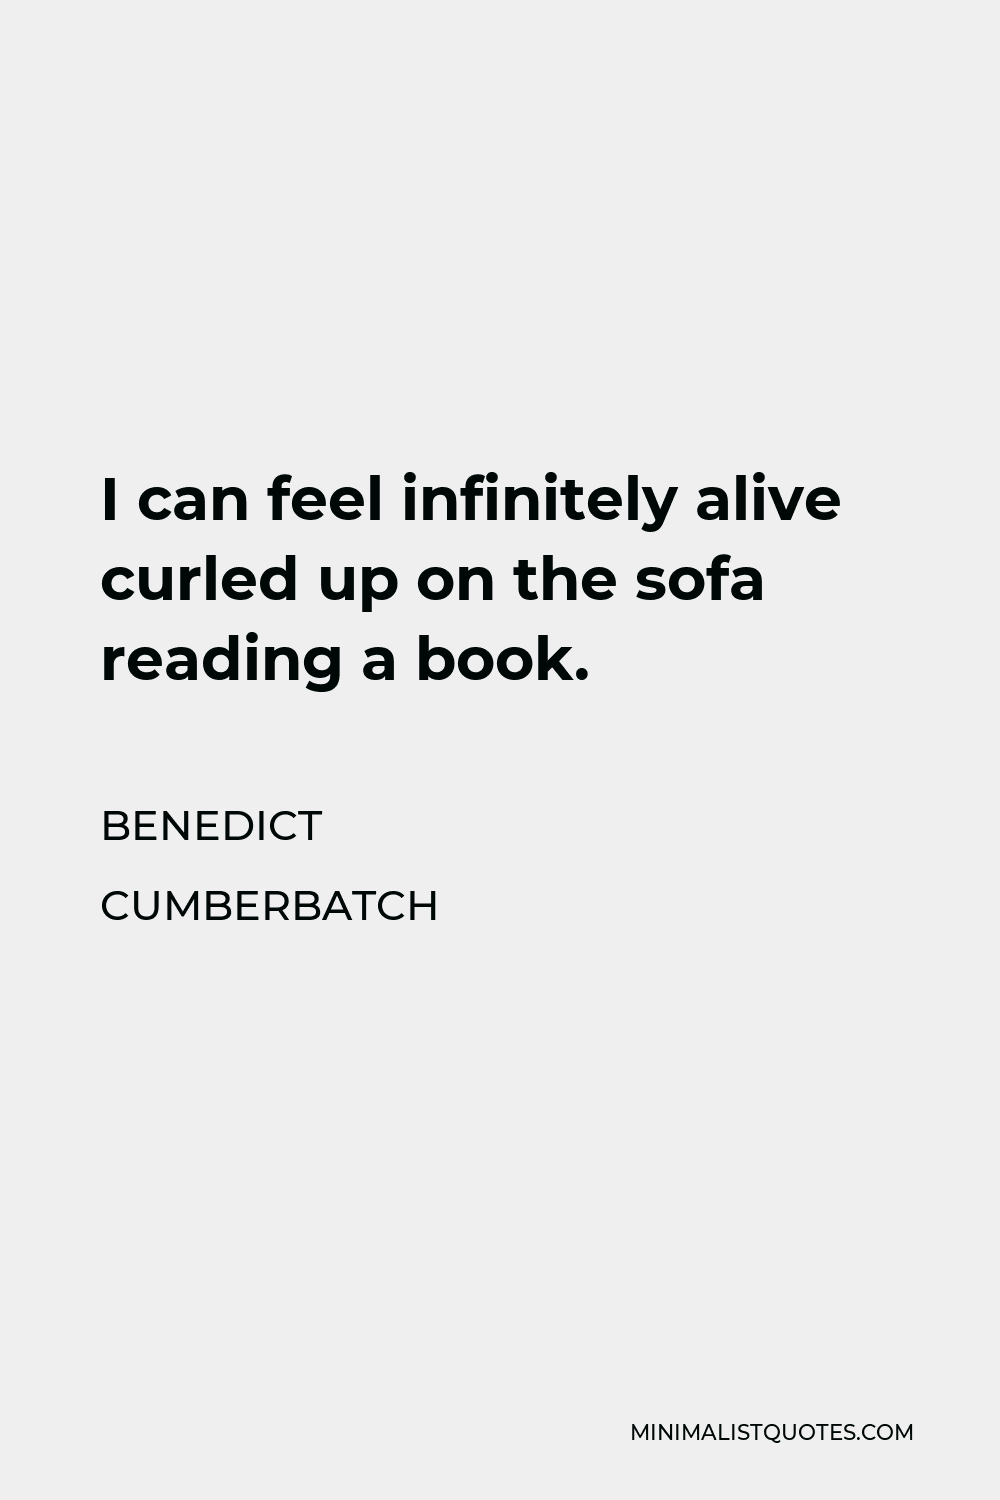 Benedict Cumberbatch Quote - I can feel infinitely alive curled up on the sofa reading a book.